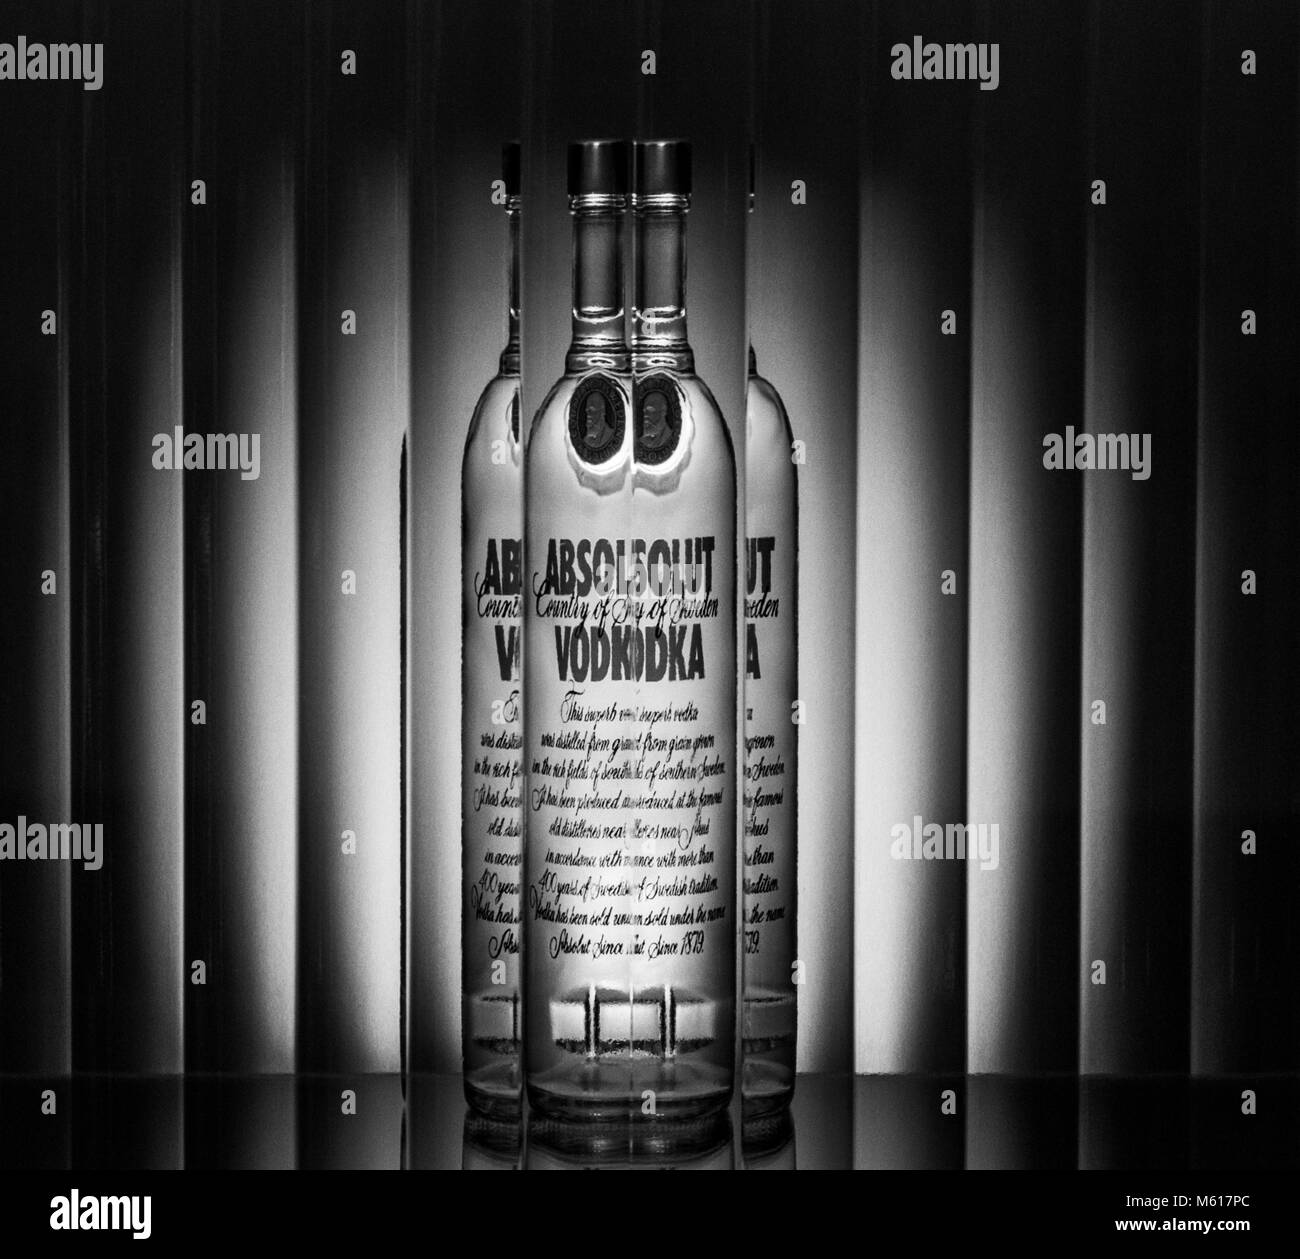 Absolut vodka bottle photographed in the style of the Absolut ads, Absolute double vision,  22 May 1992 Stock Photo